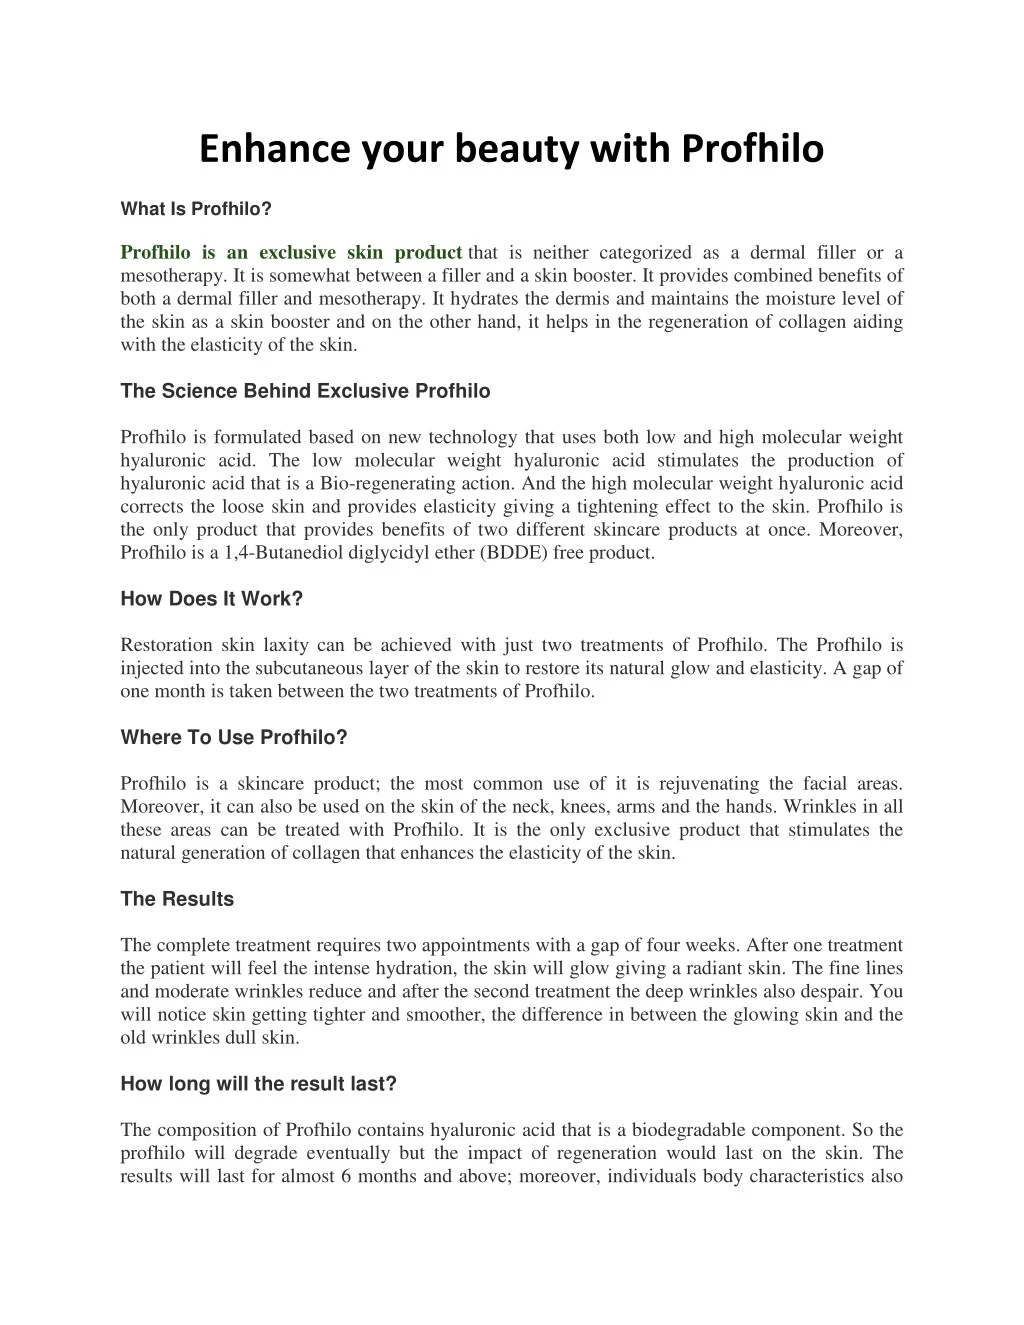 enhance your beauty with profhilo